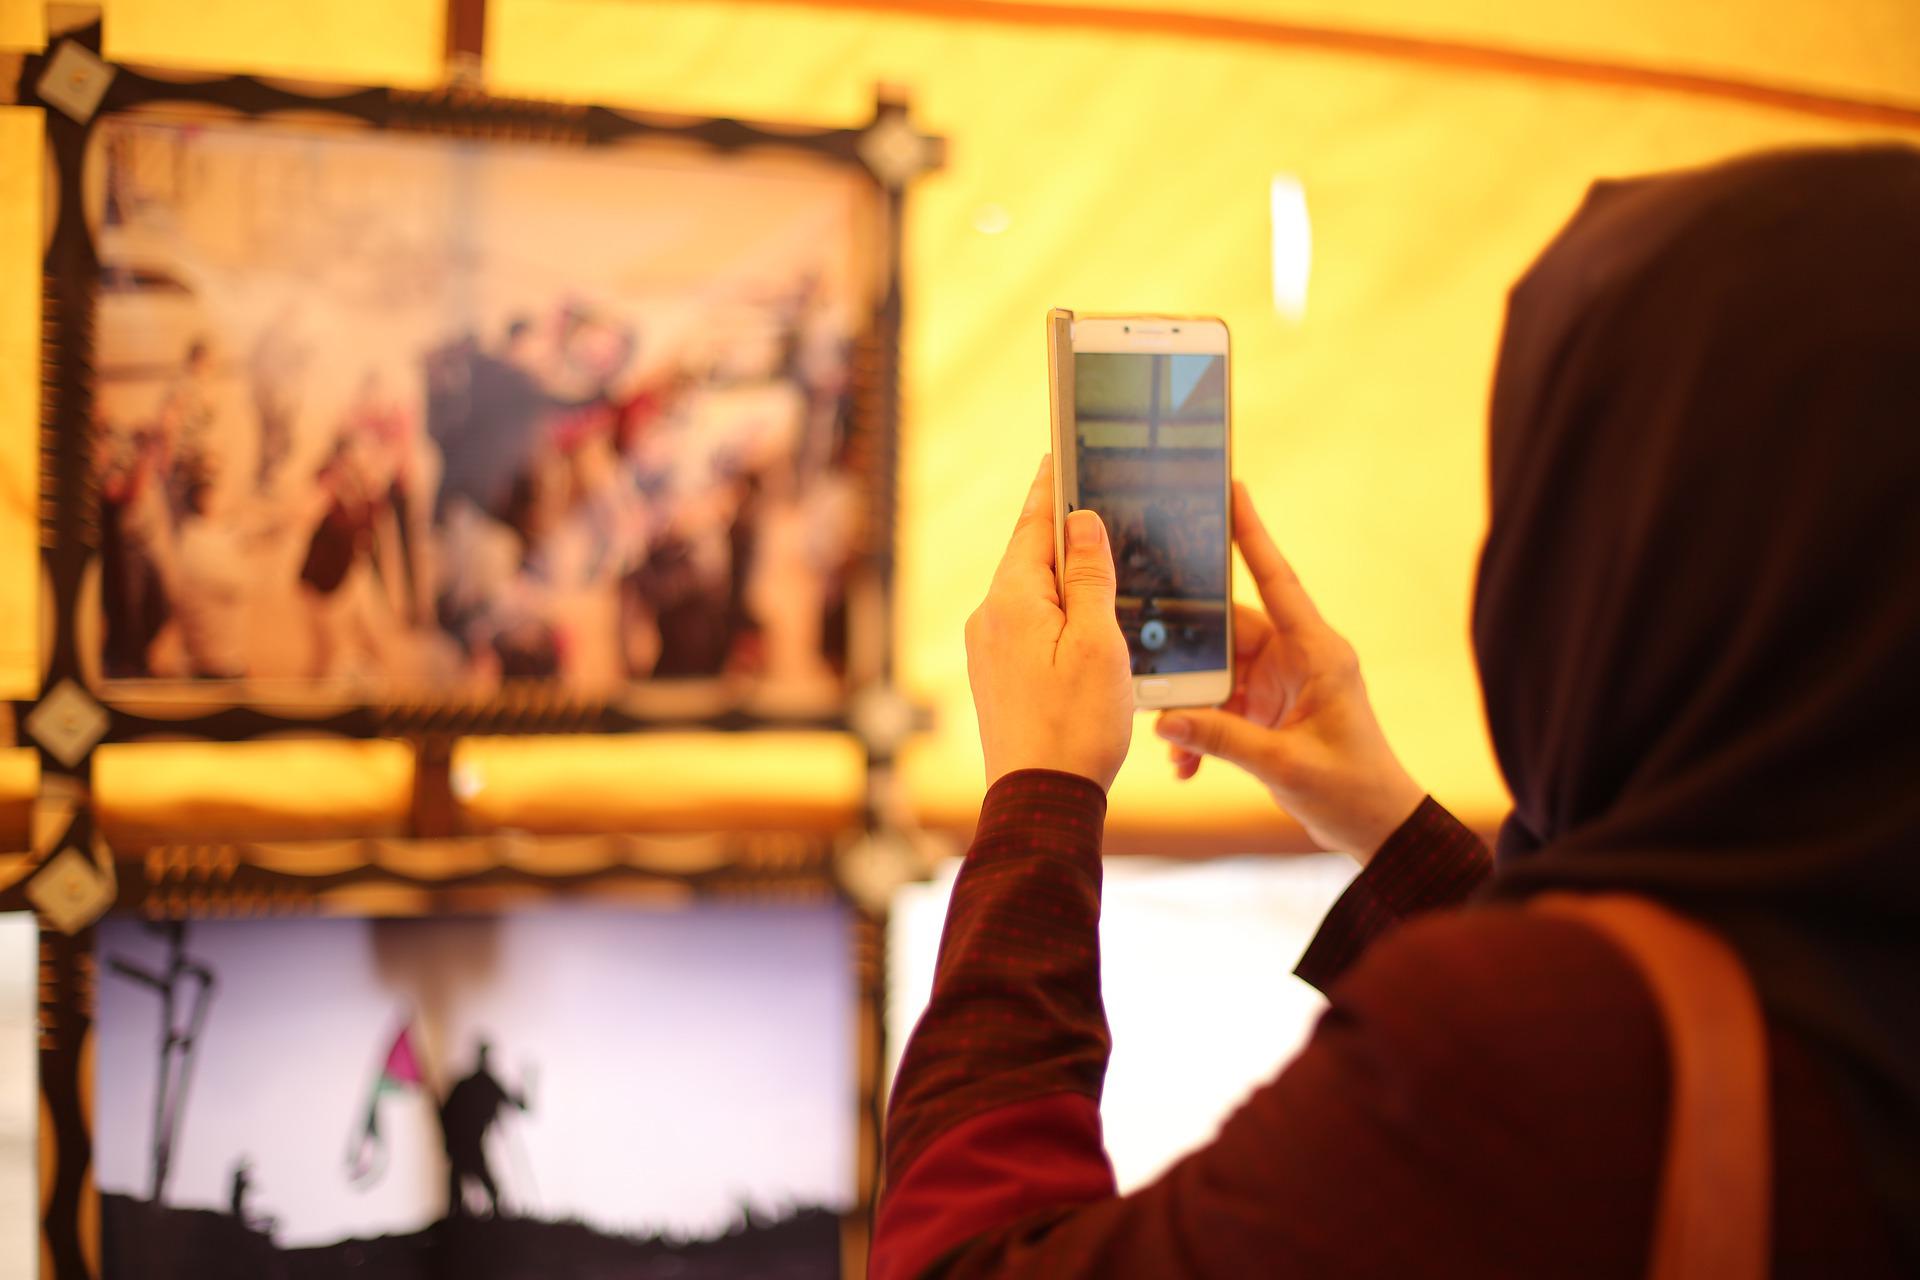 Woman in a hijab taking a photo with a mobile phone